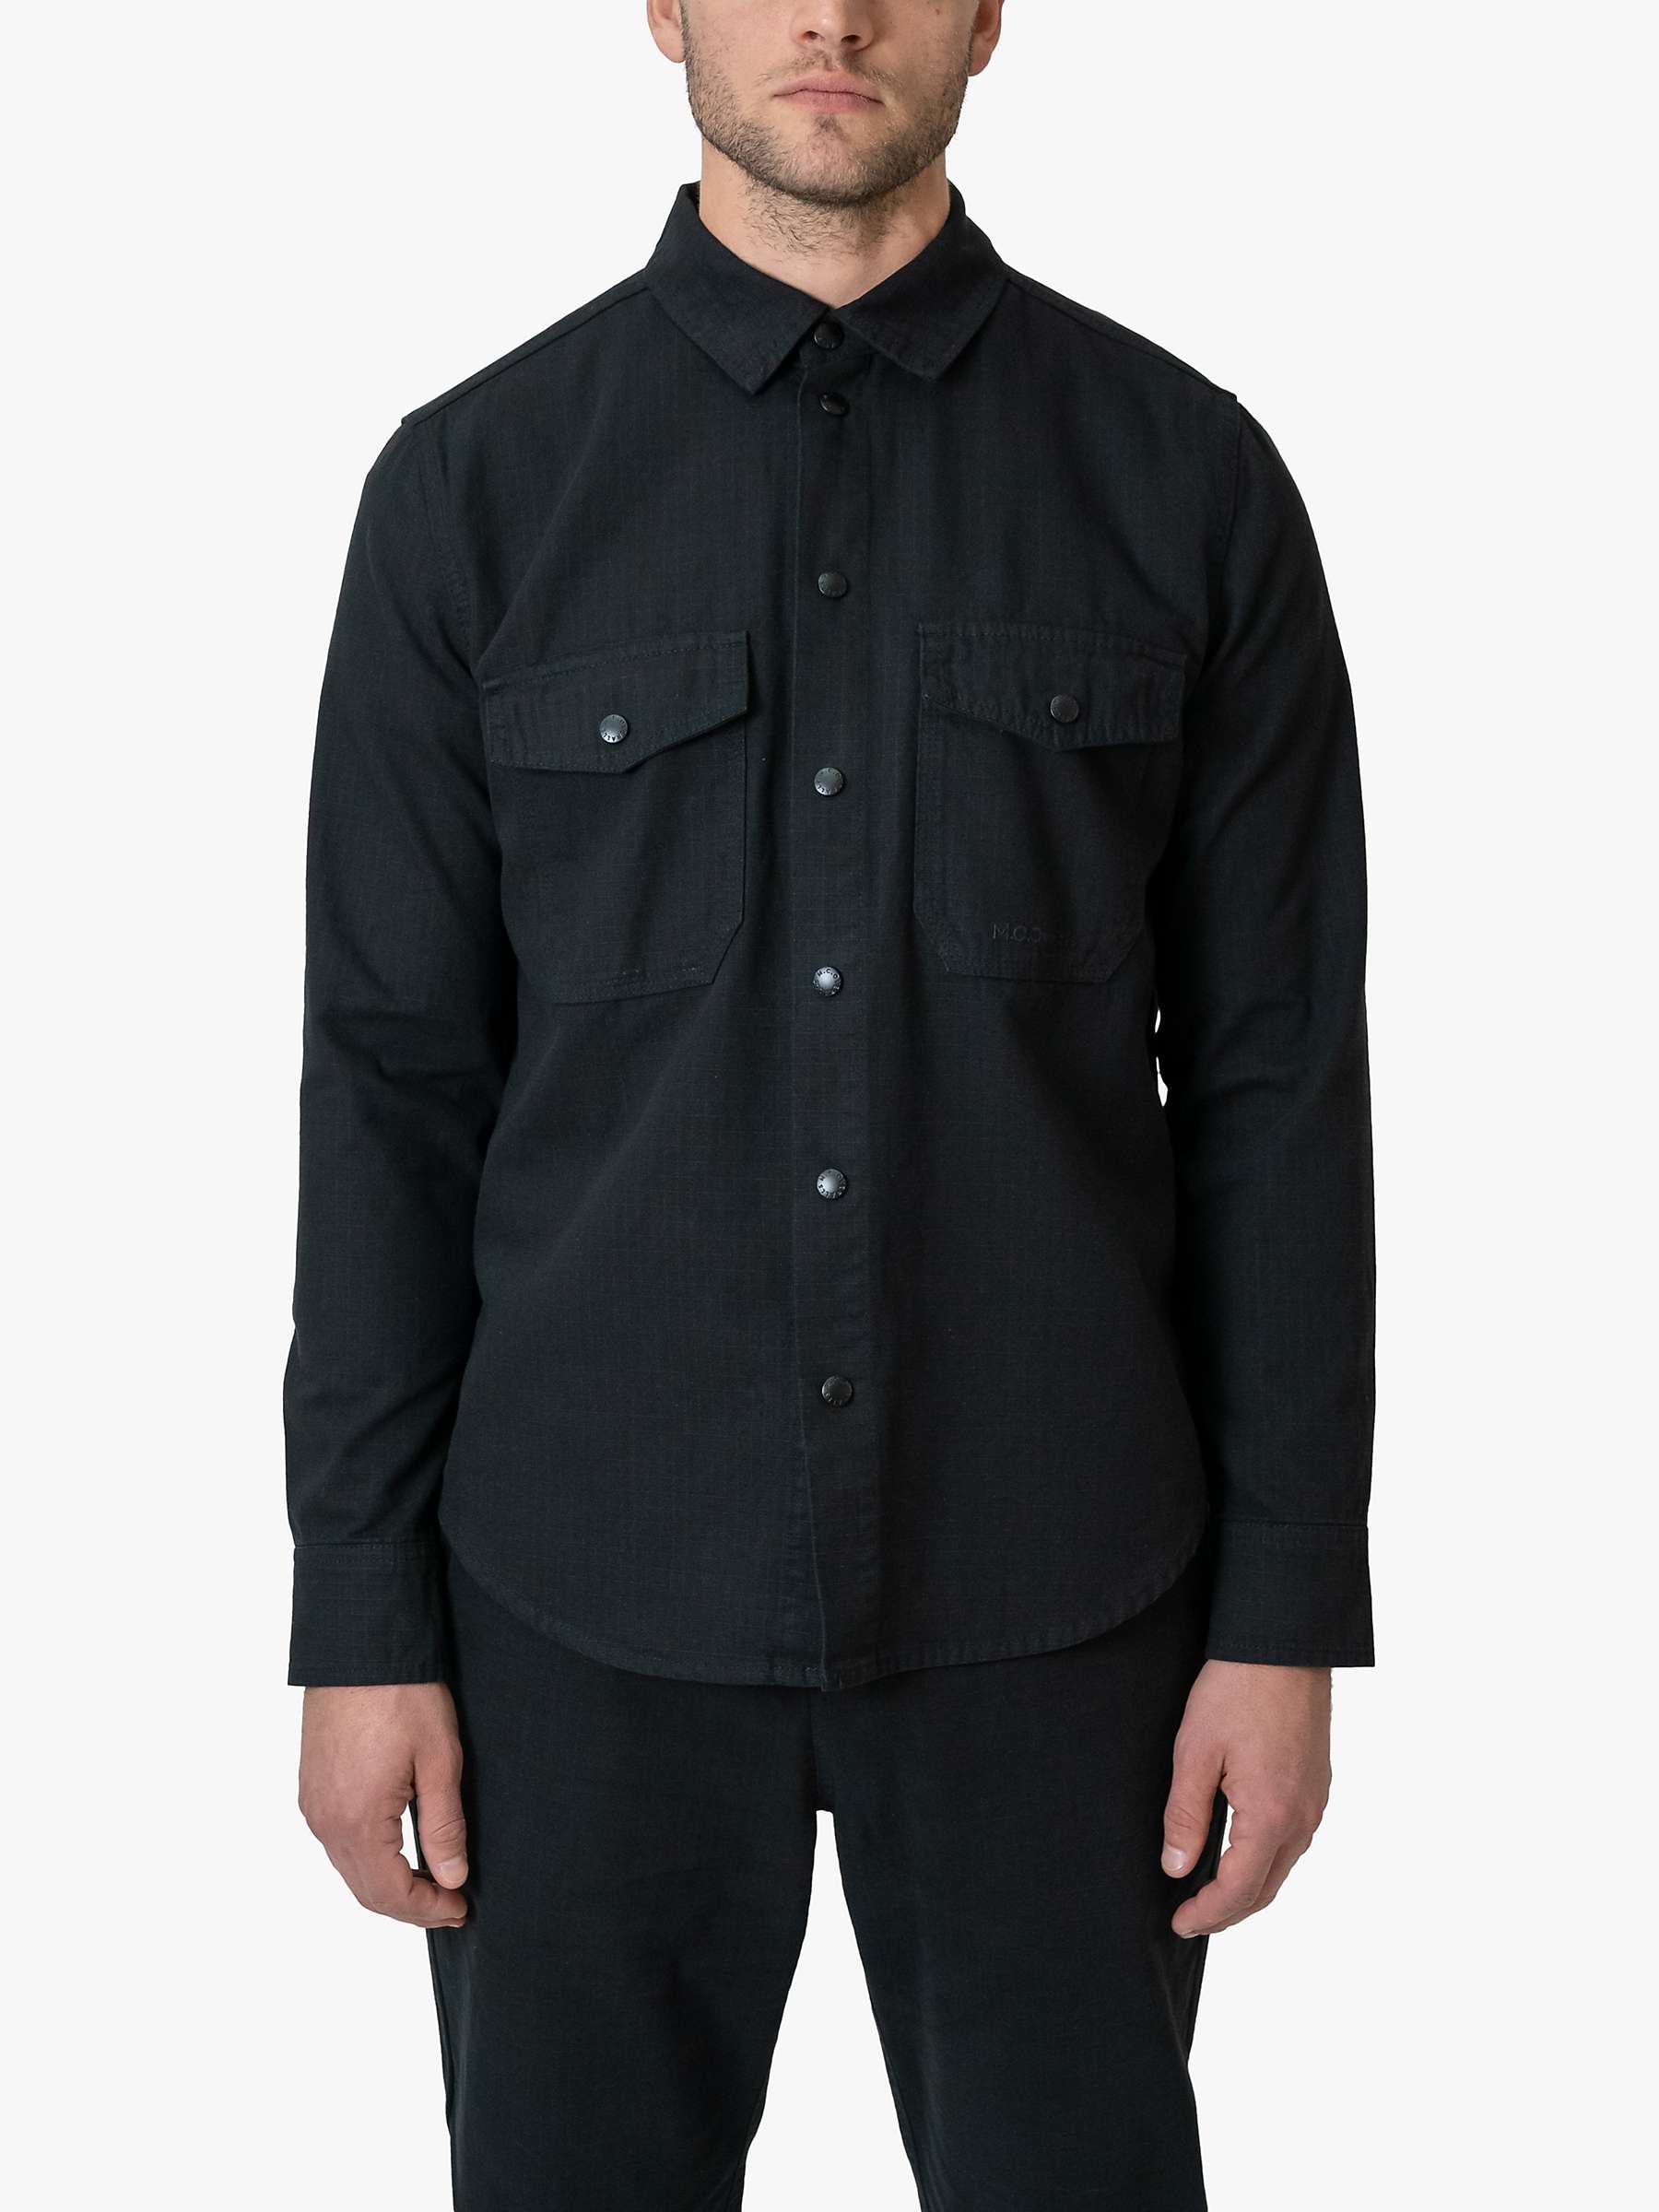 Buy M.C.Overalls Ripstop Double Pocket Snap Shirt Online at johnlewis.com